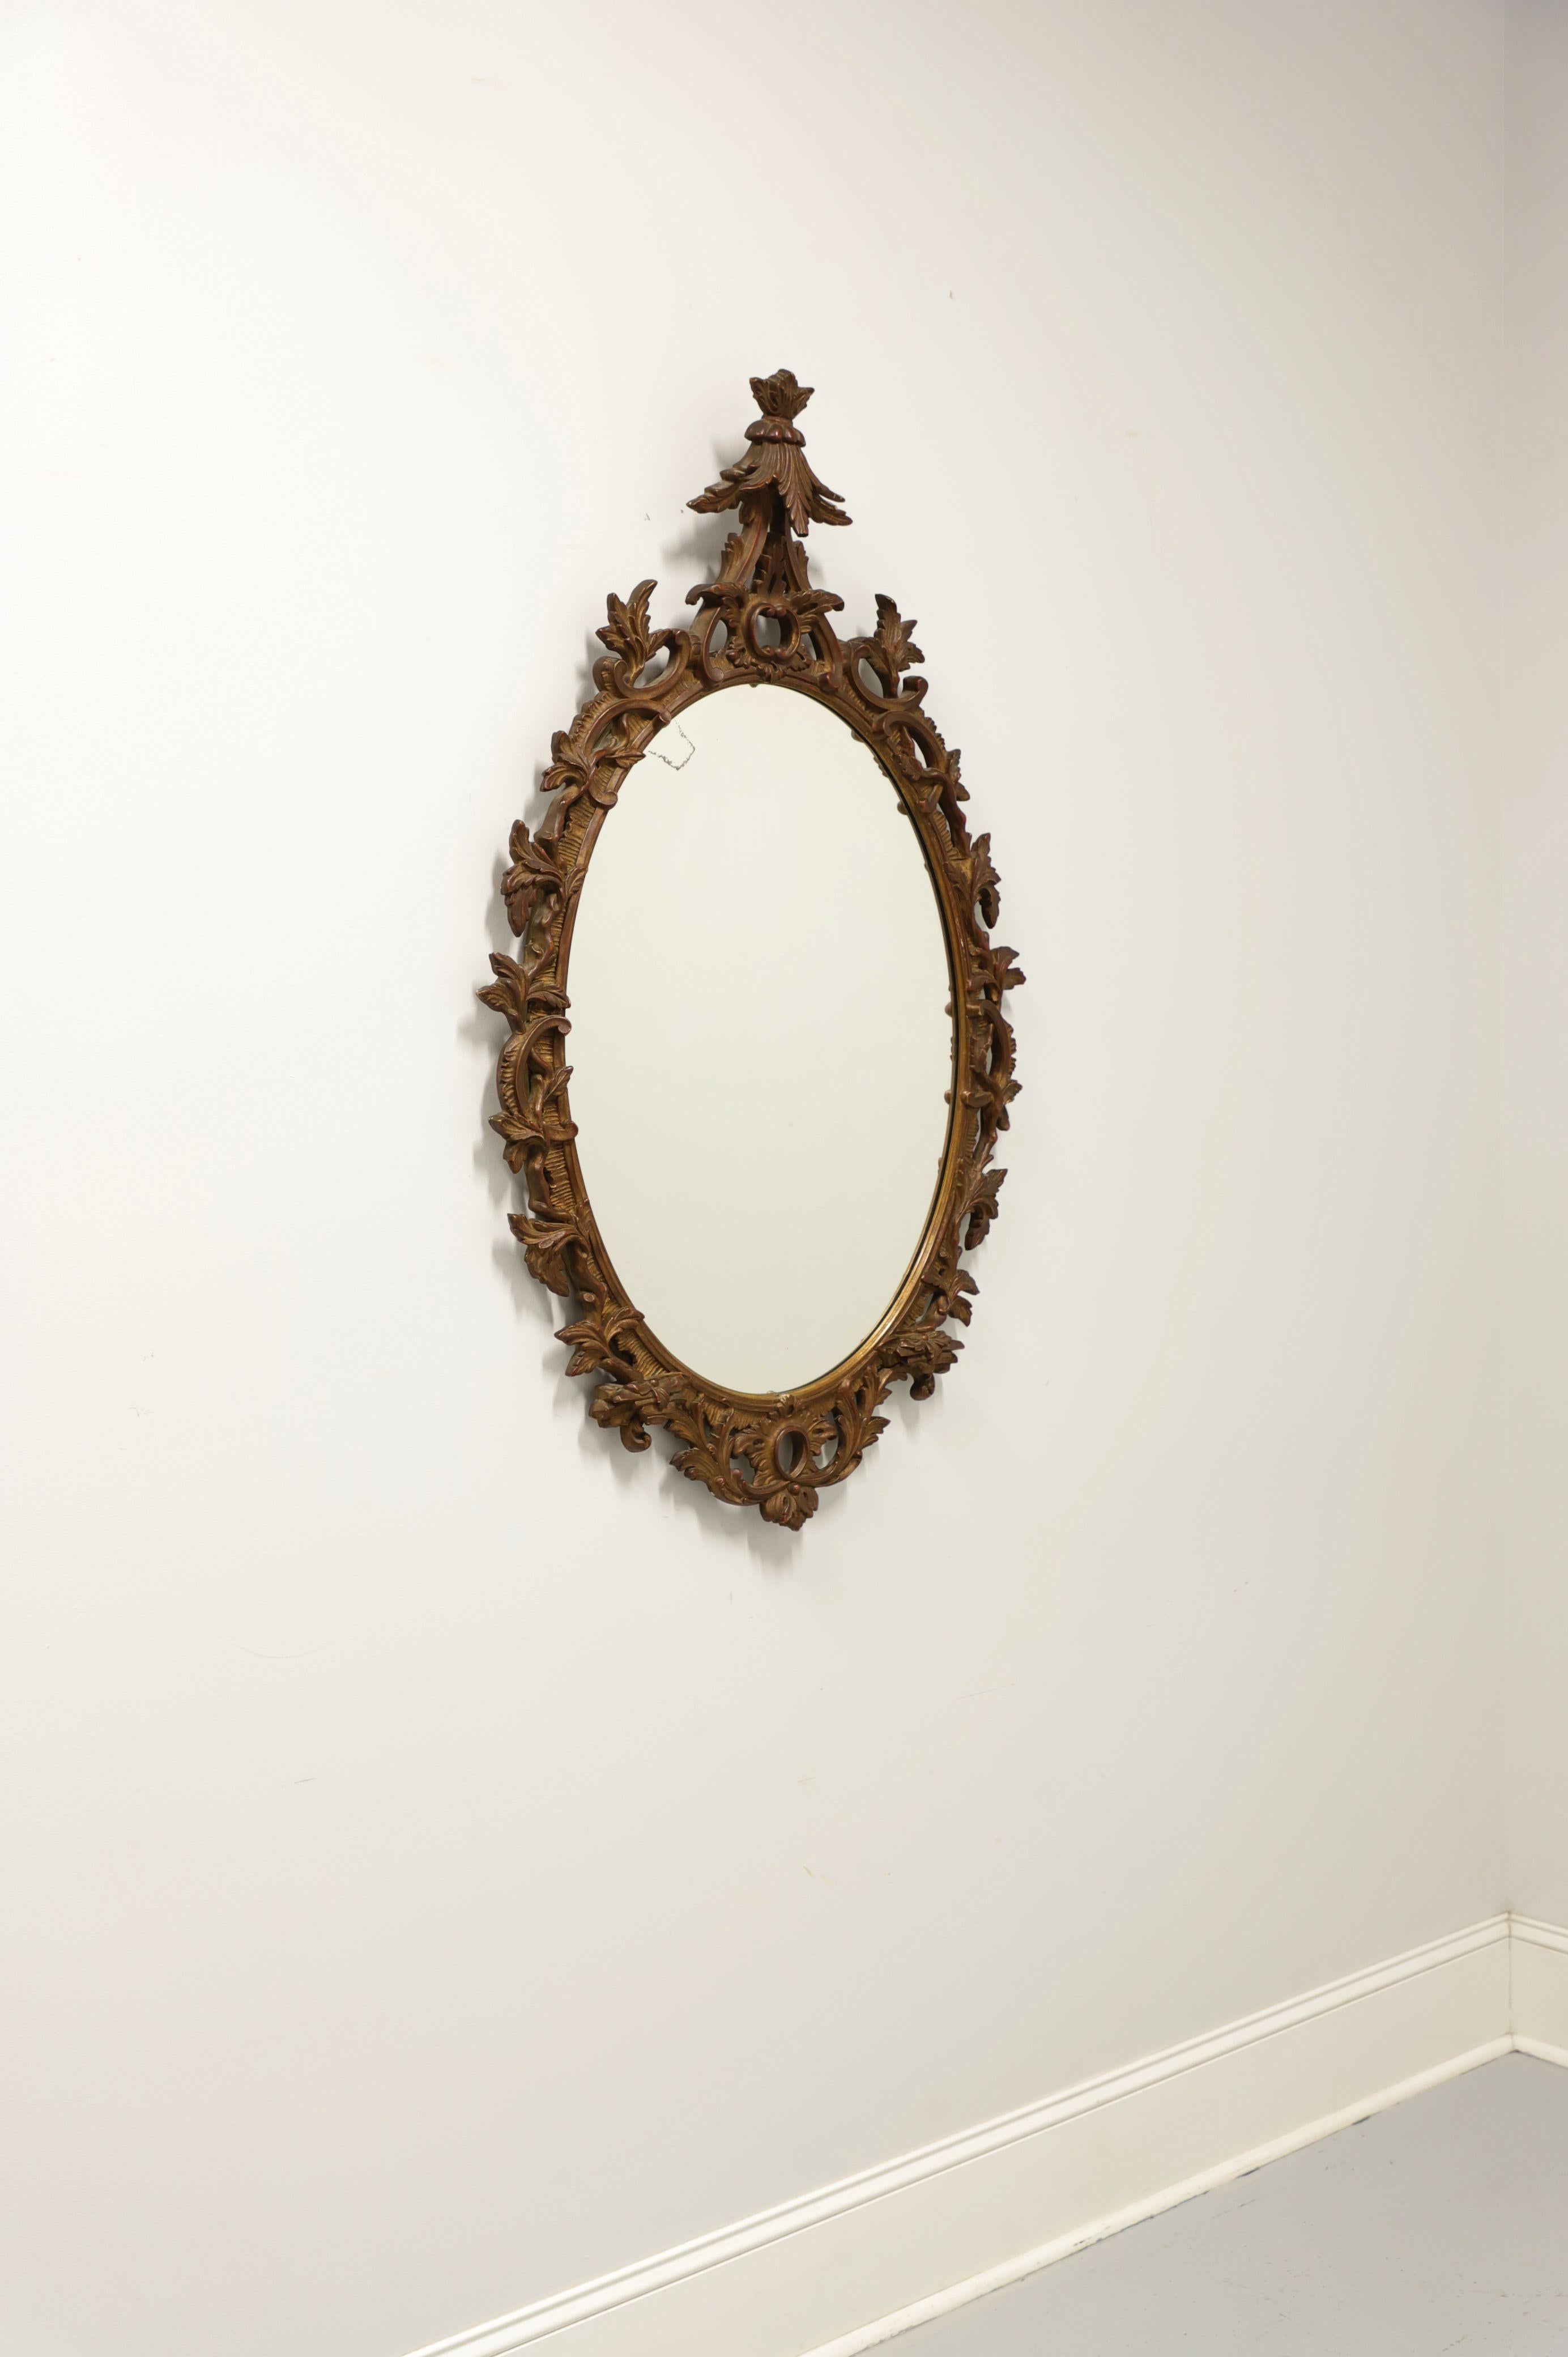 A Baroque style oval wall mirror by Charles of London. Mirrored glass with a carved wood frame painted bronze. Features ornate acanthus leaf carvings throughout and most decoratively to top. Likely made in England, in the early 20th